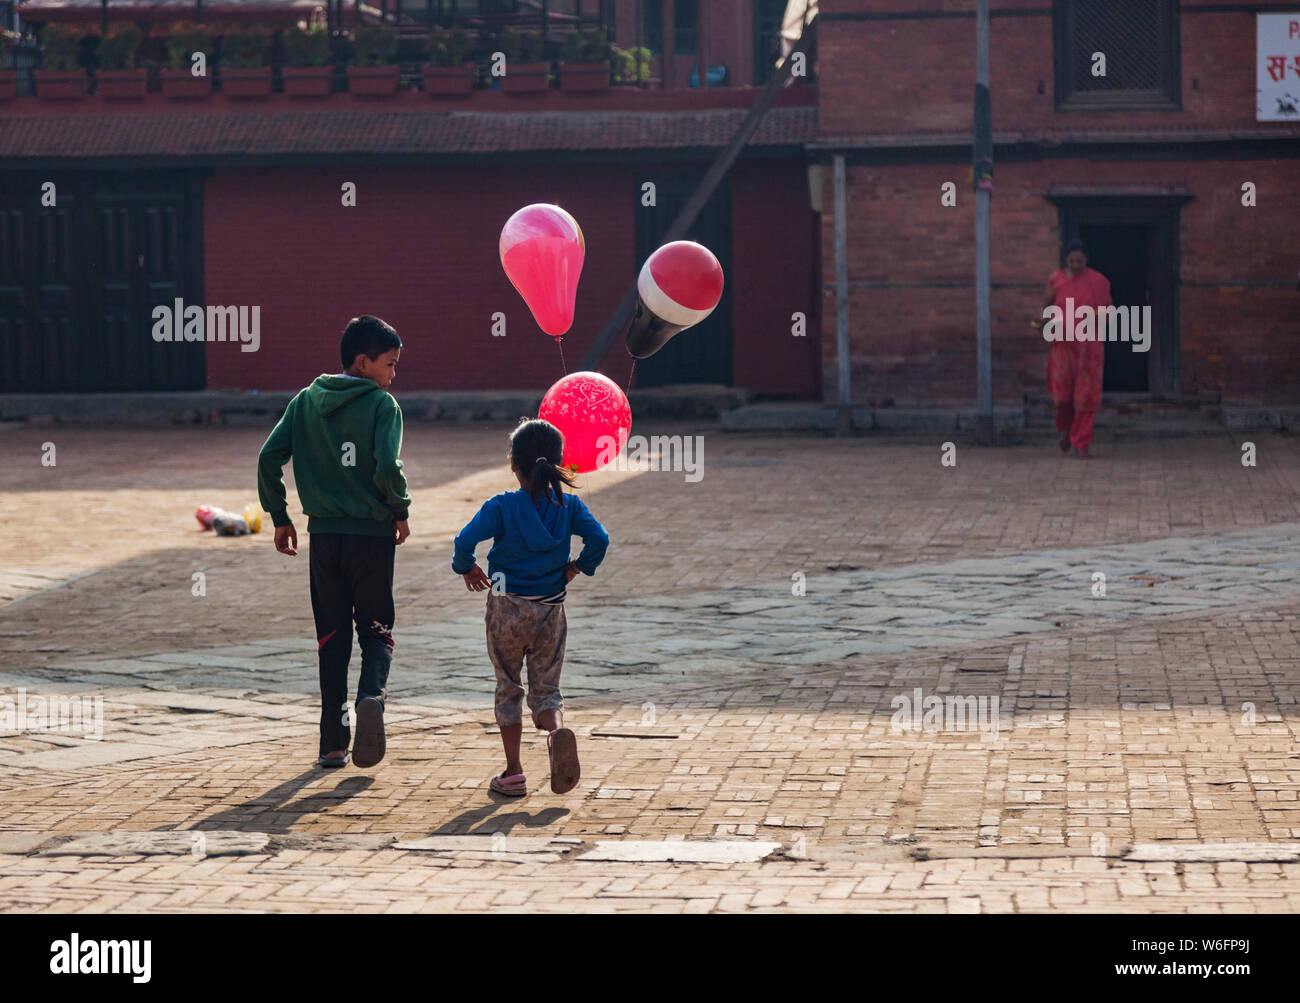 Boy and girl with pink balloons walking through a square in Kathmandu, Nepal. Stock Photo